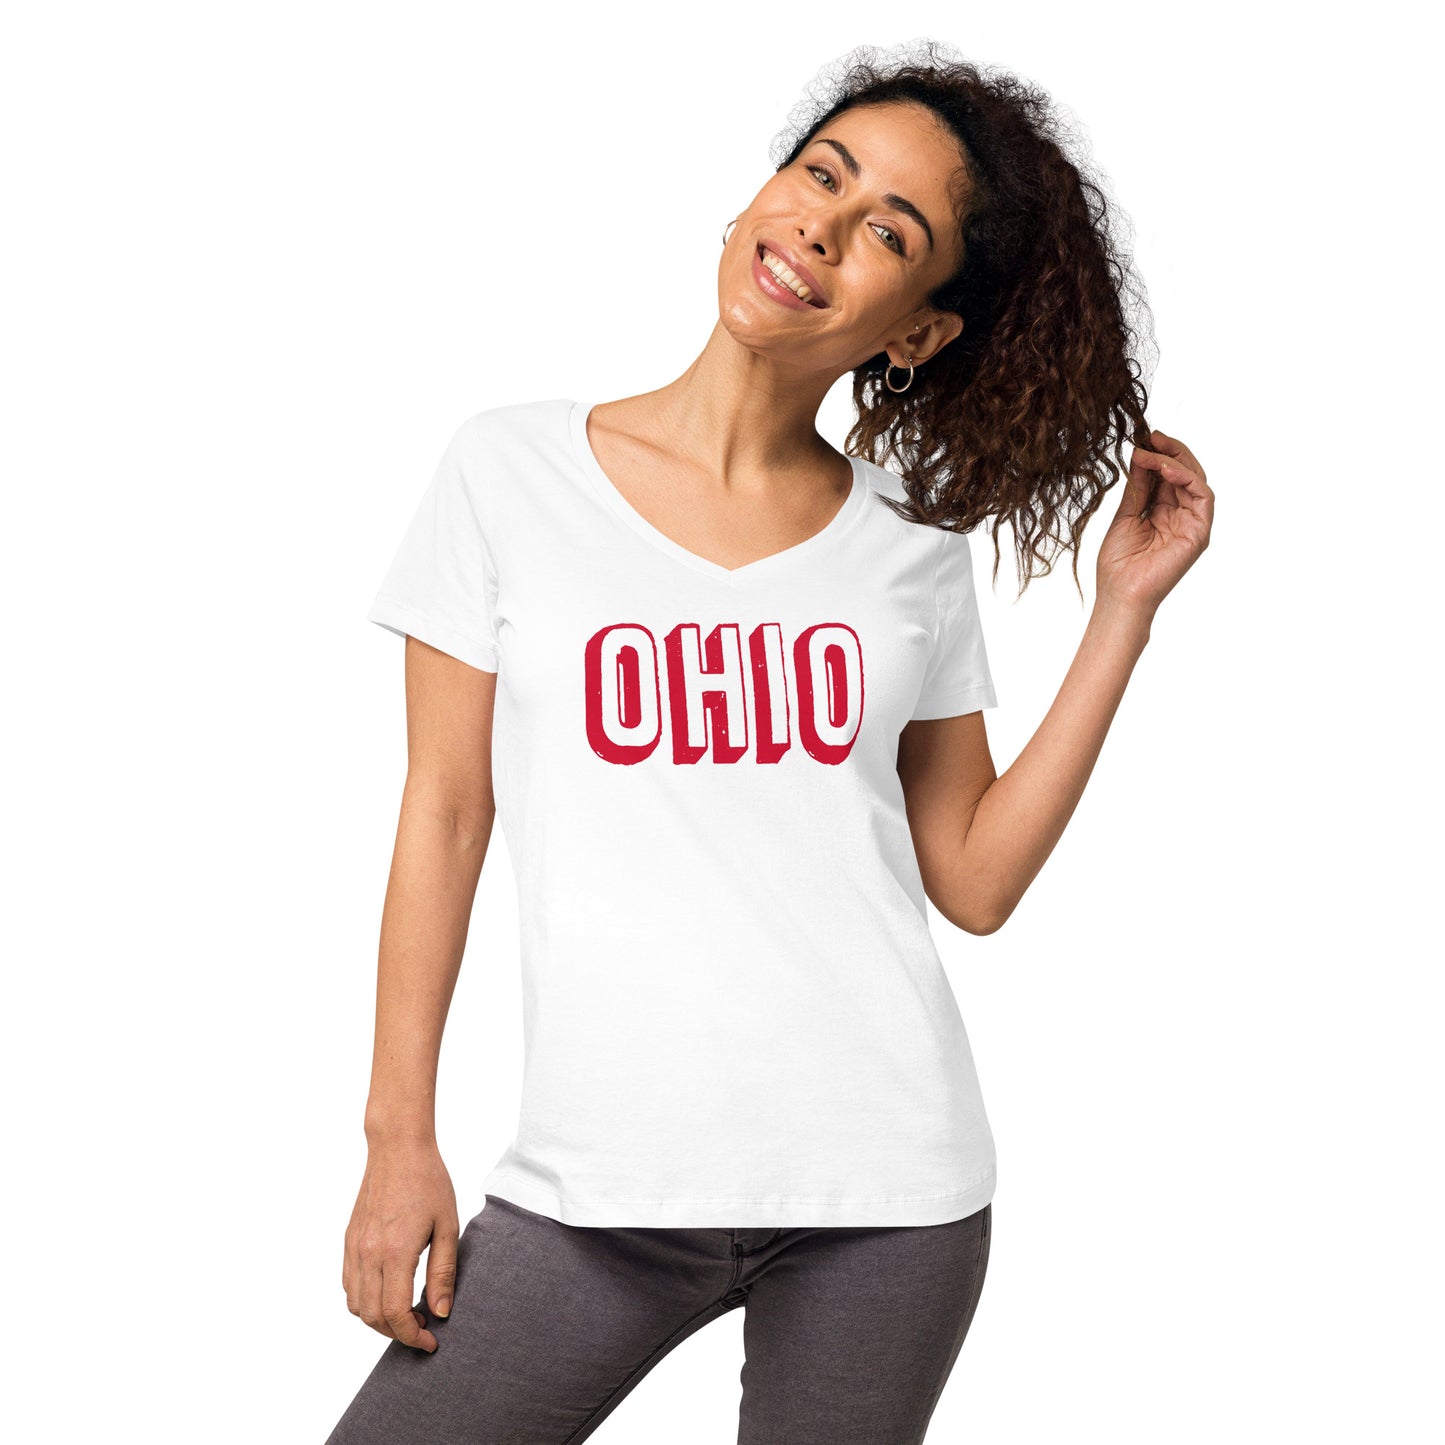 OHIO-dimensional graphic-Women’s fitted v-neck t-shirt